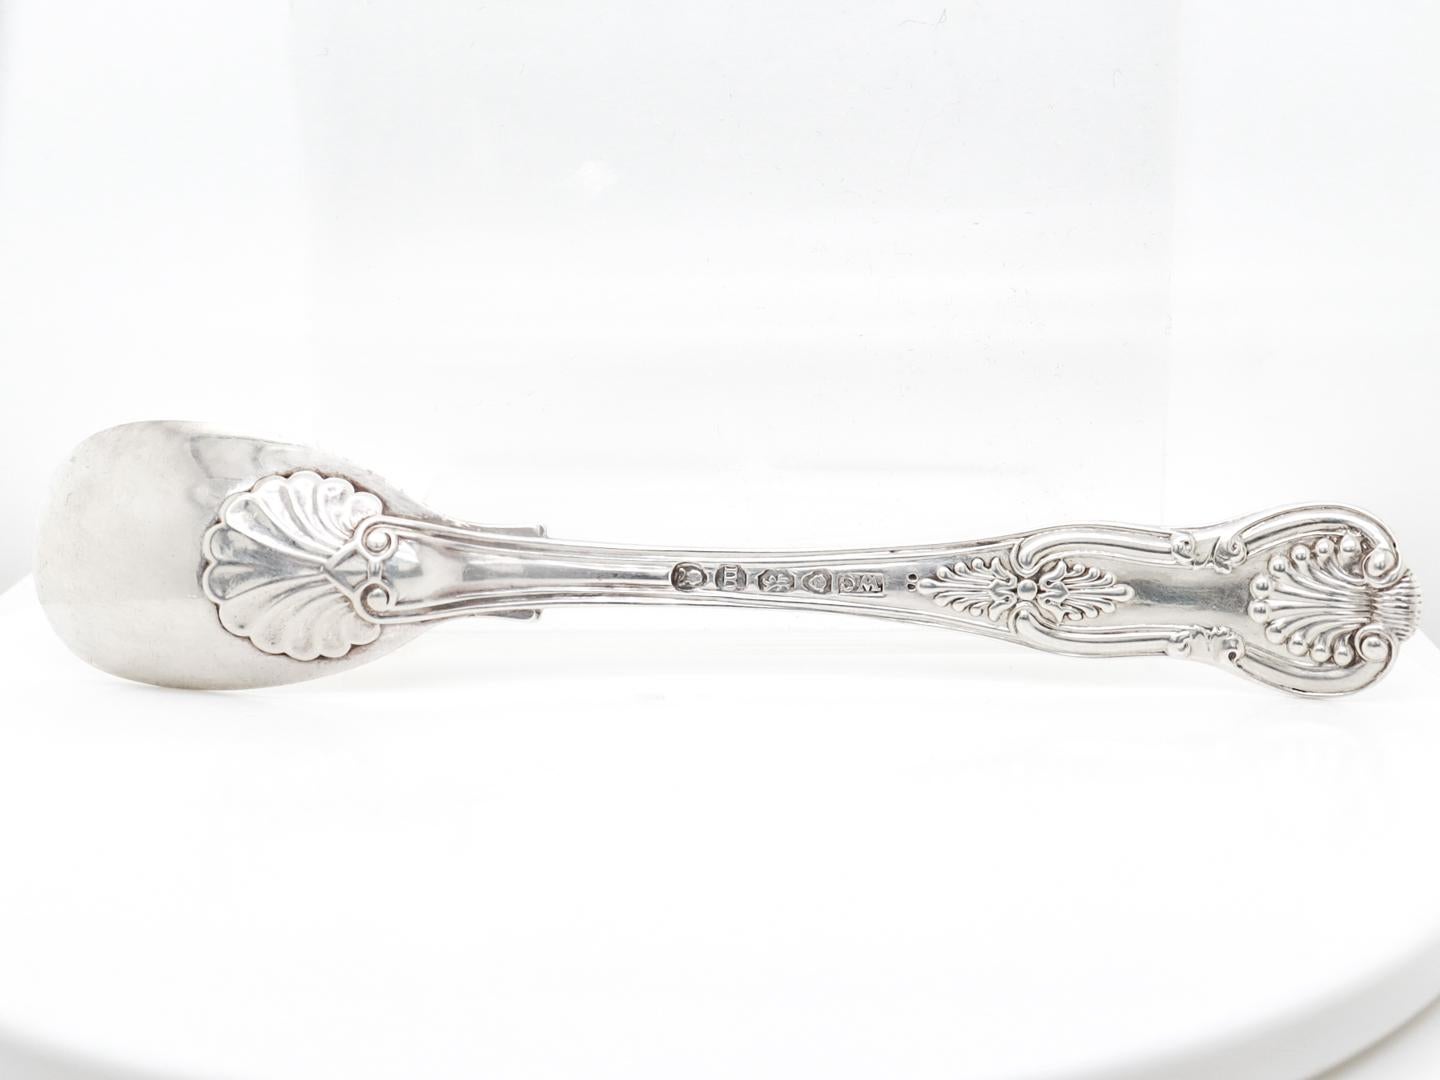 Antique English Sterling Silver Kings Mustard Spoon by William Chawner II For Sale 1